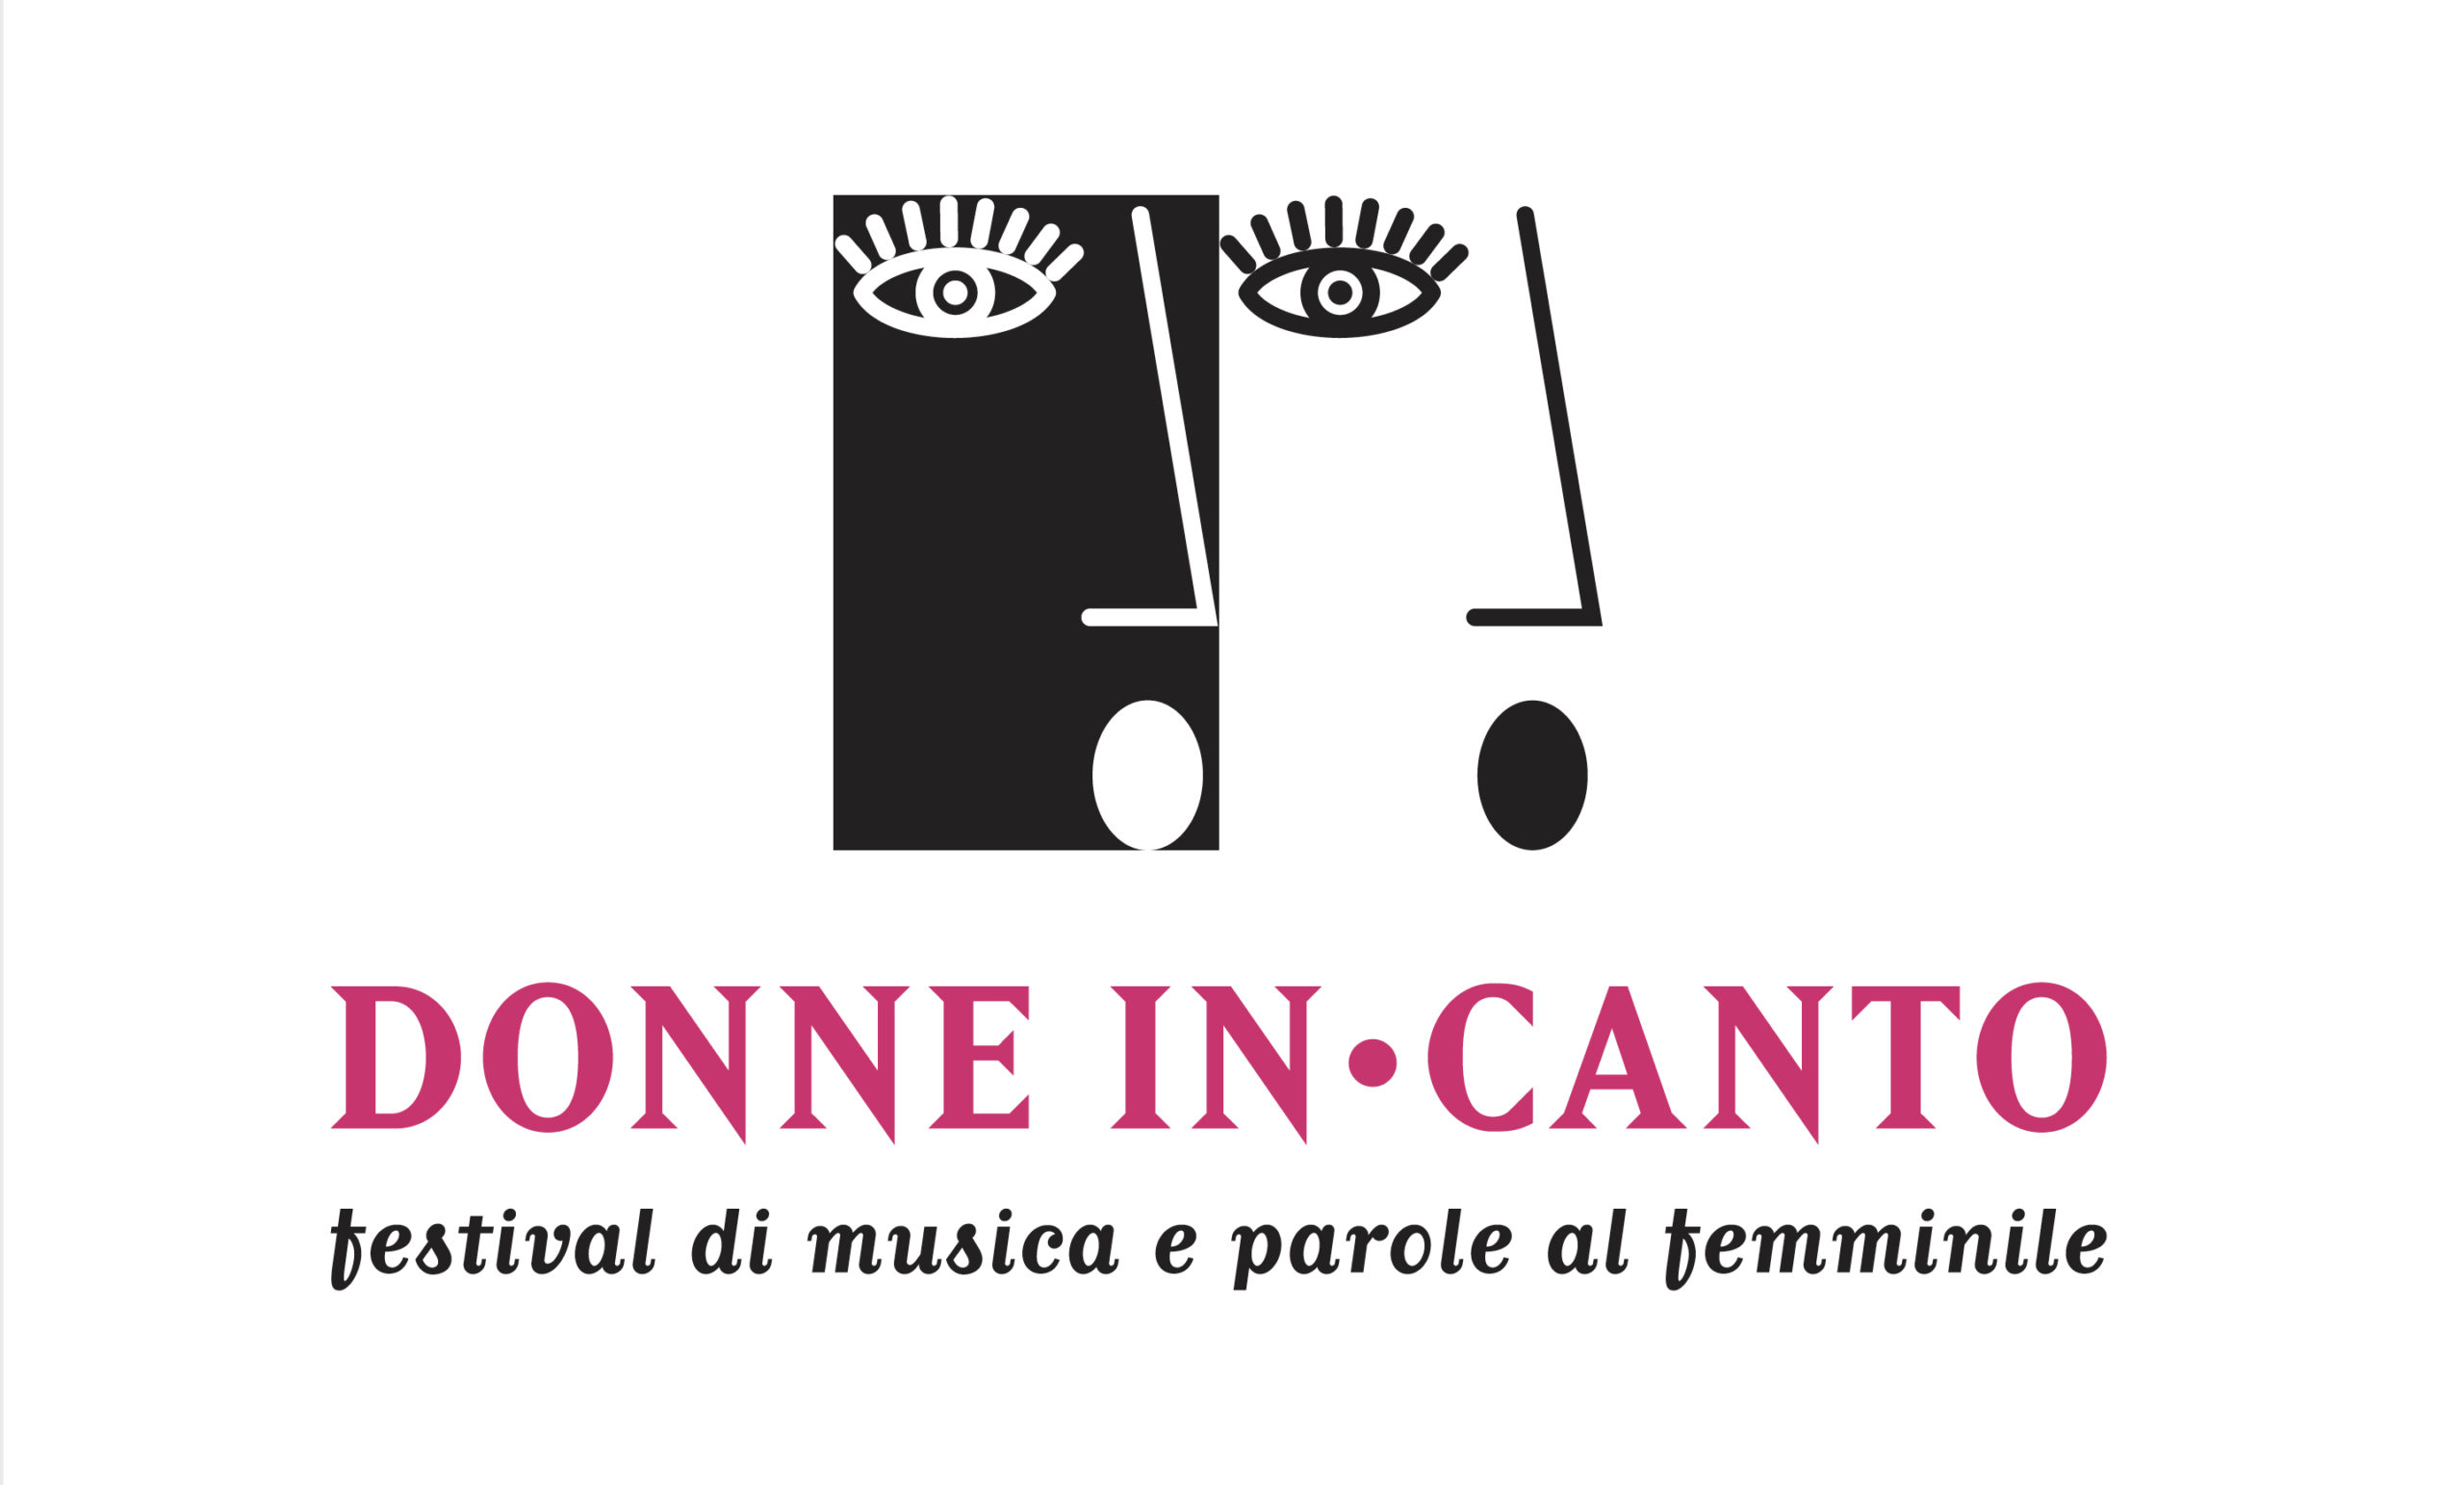 DONNE IN CANTO